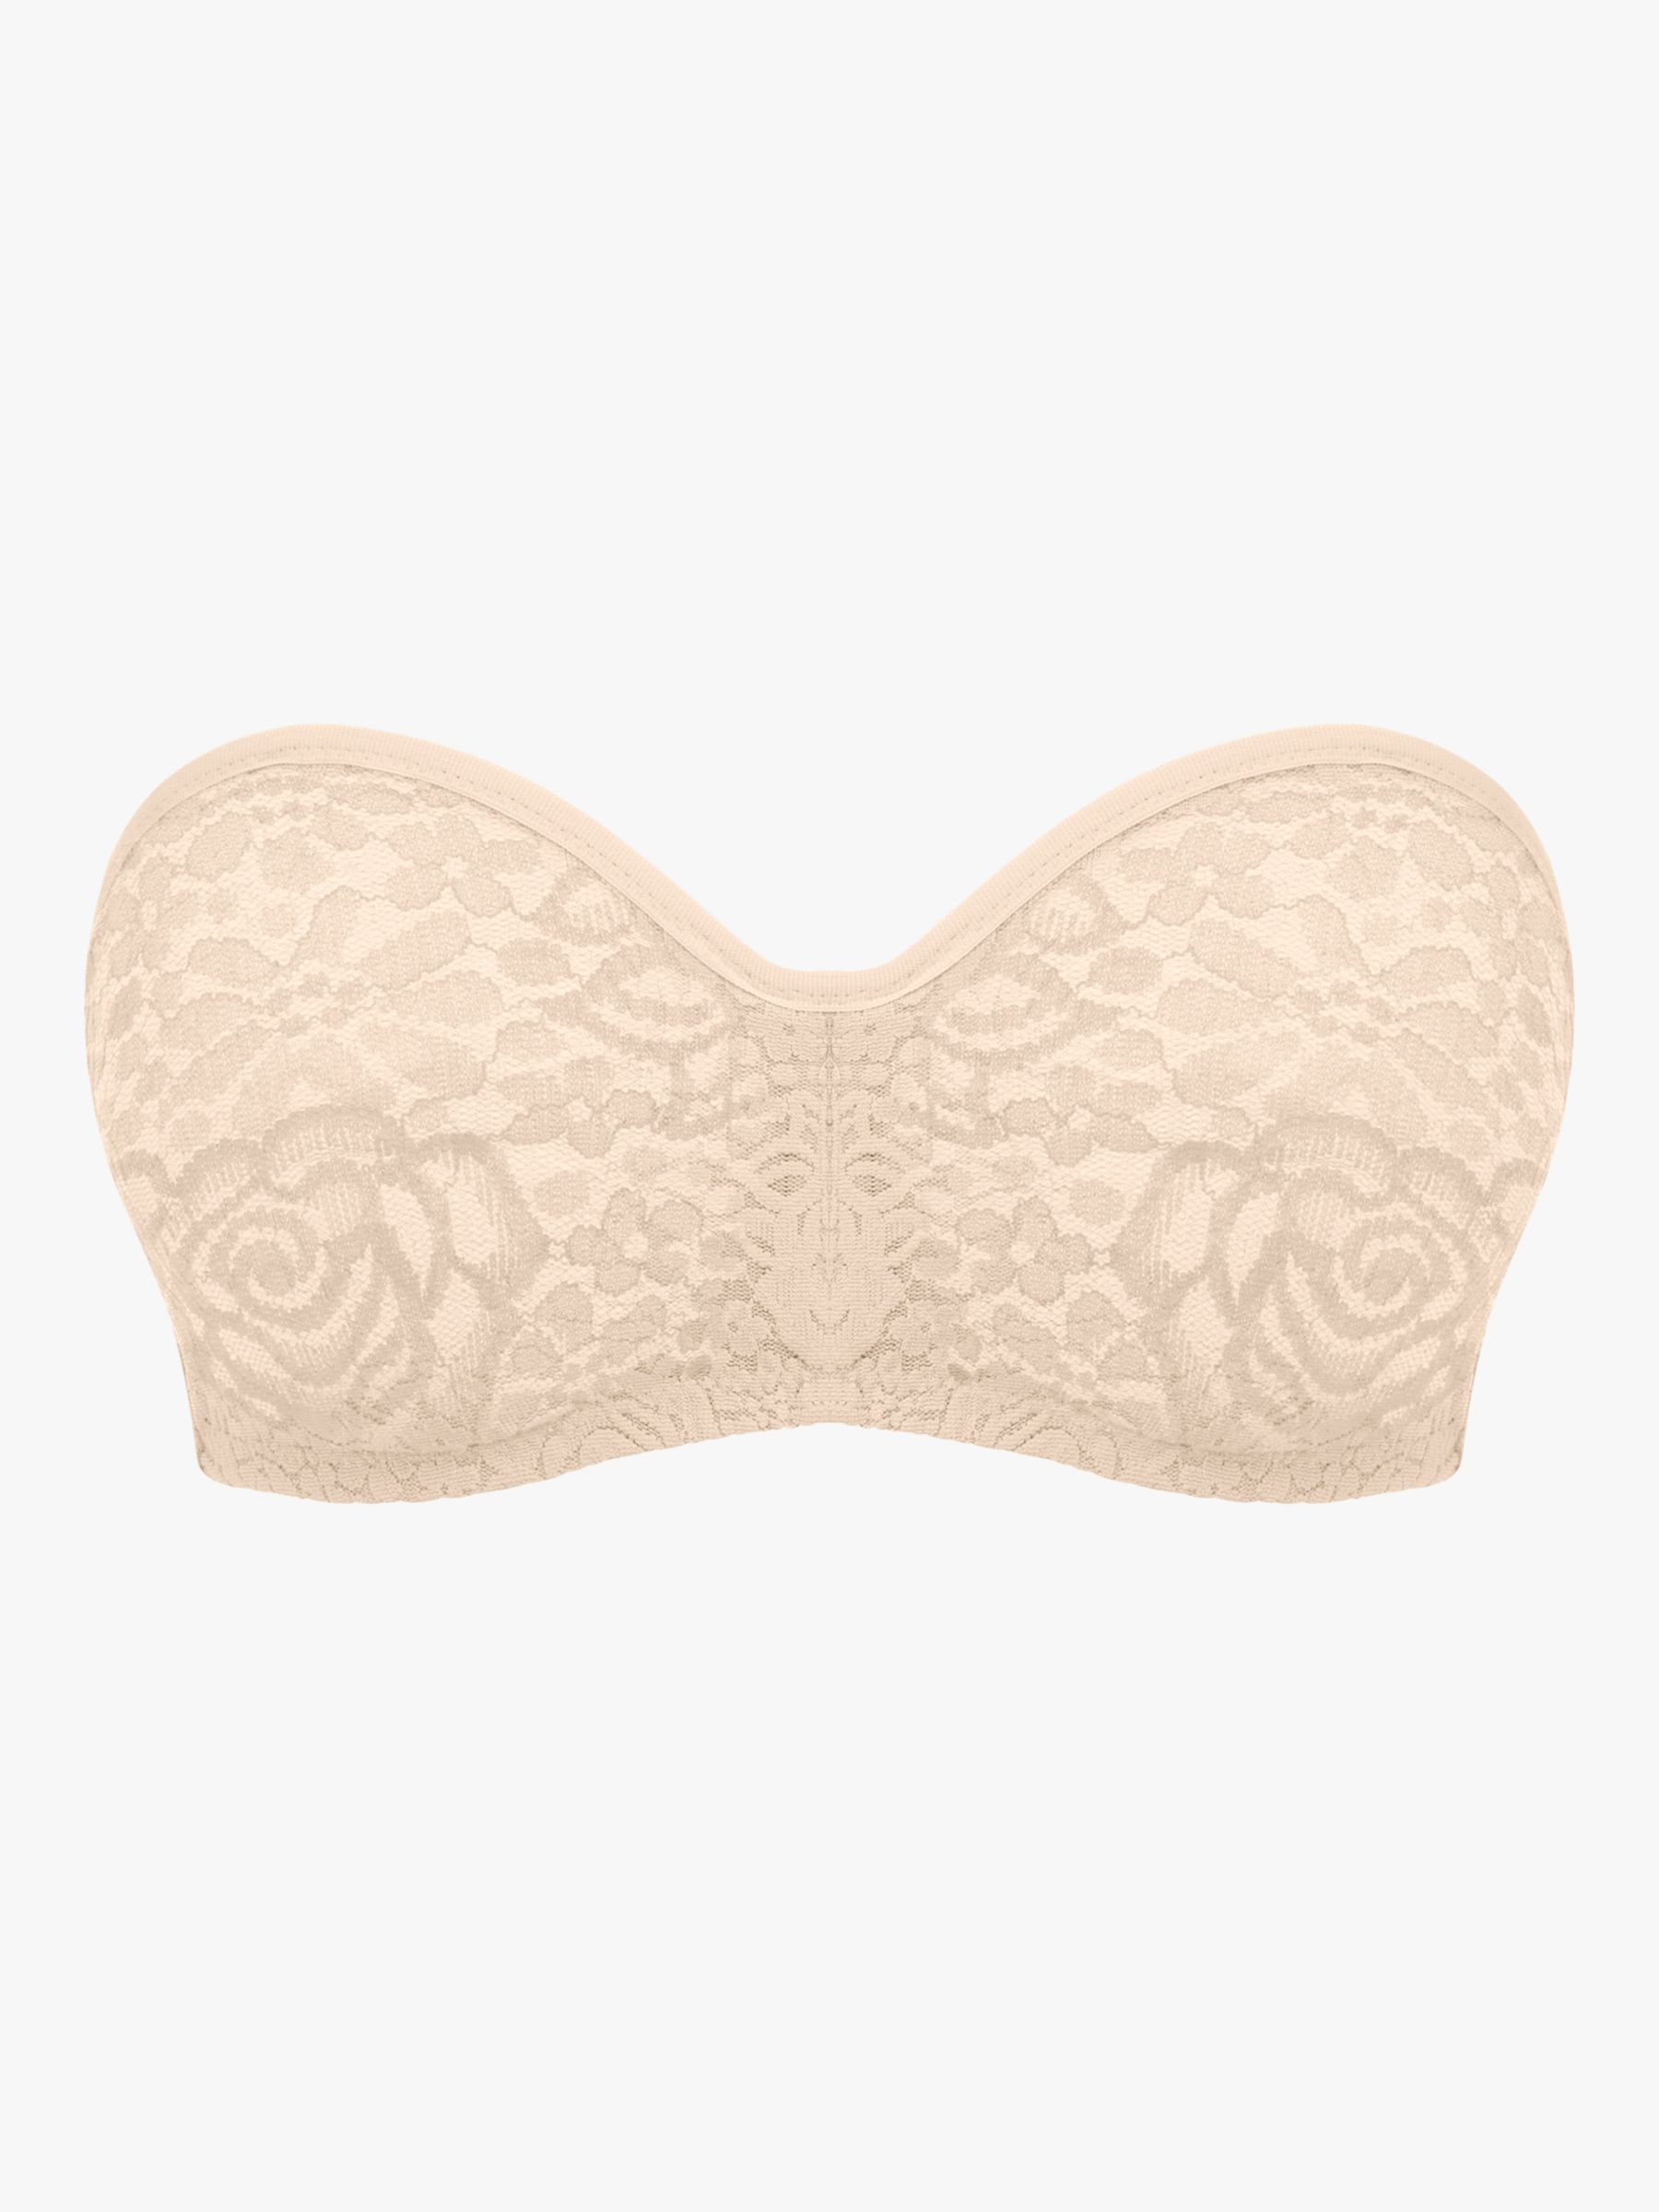 Wacoal - Turn up the heat in our Halo Lace Strapless Bra